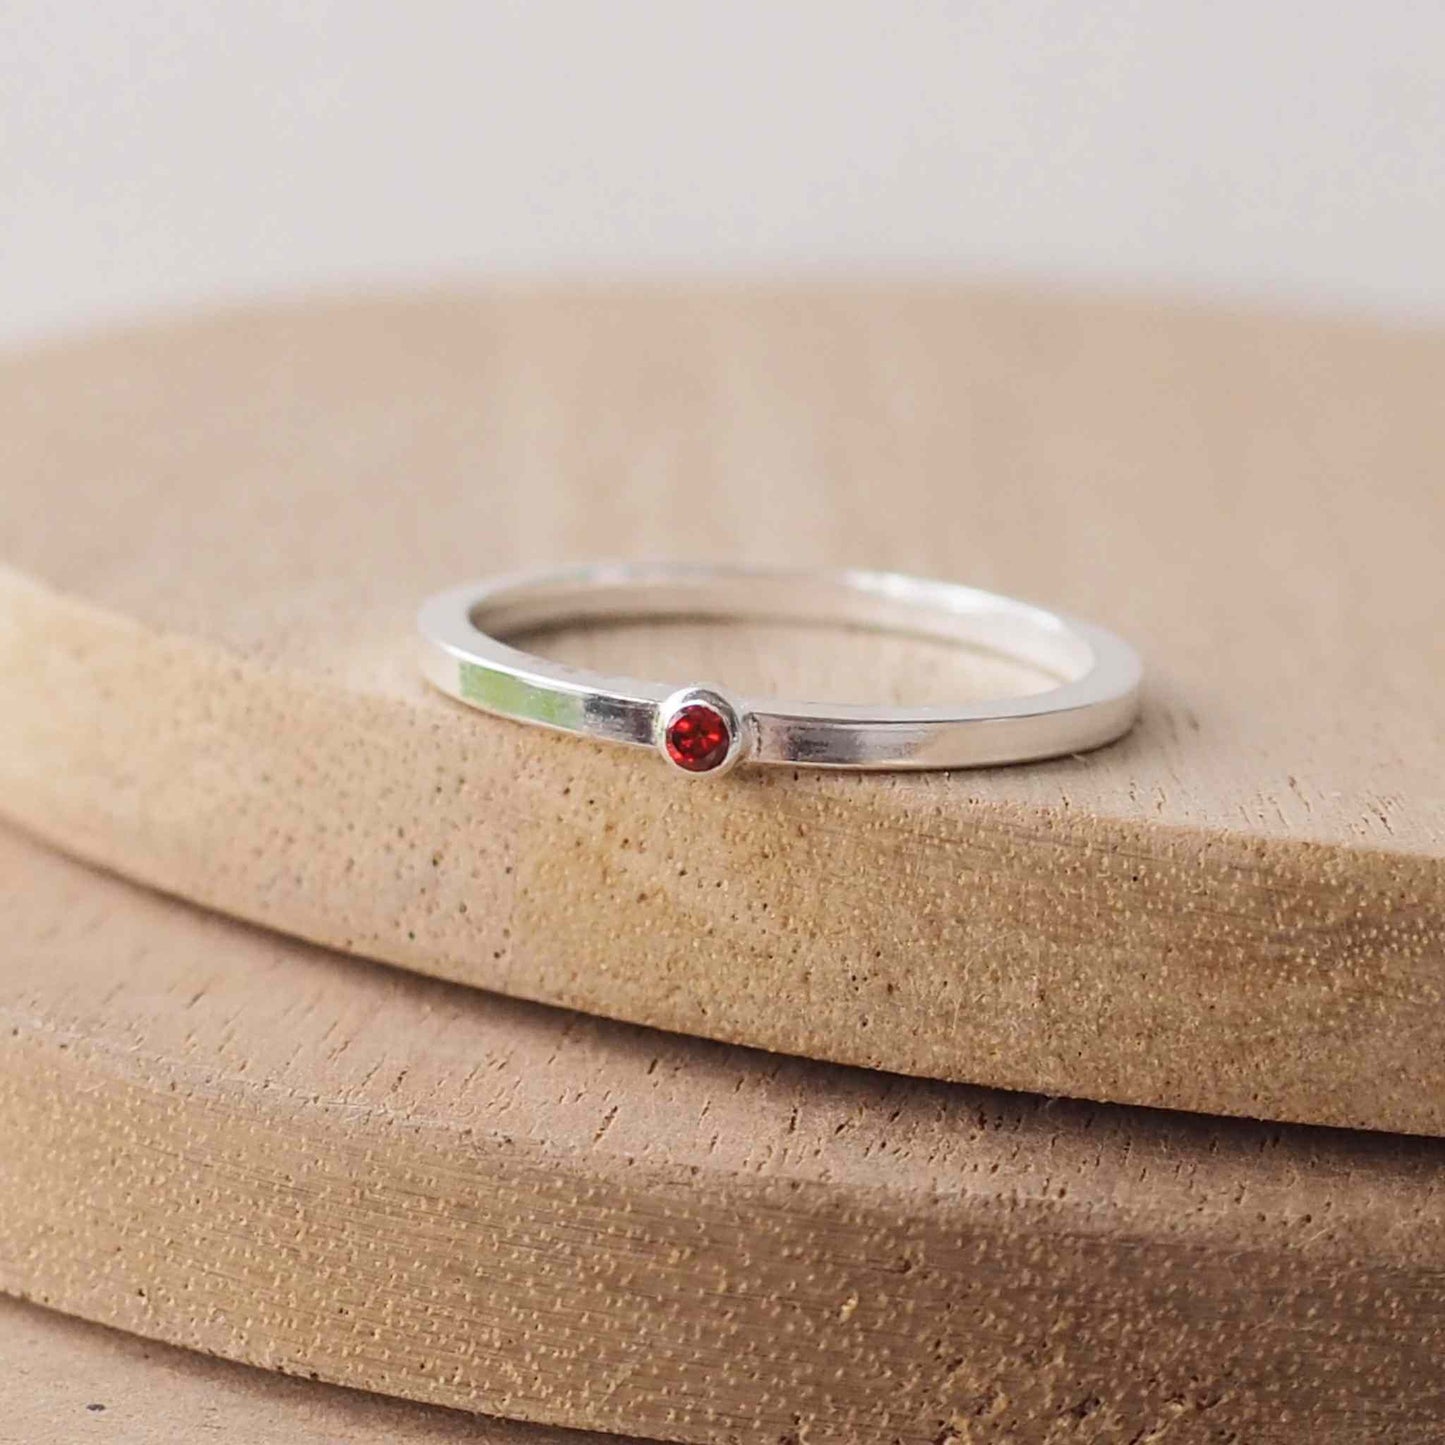 Garnet and Sterling Silver solitaire ring with a deep red coloured round cubic zirconia measuring 2mm in size. A very simple minimalist ring made from Sterling Silver on a minimalist square style band. Handmade in Scotland by maram jewellery